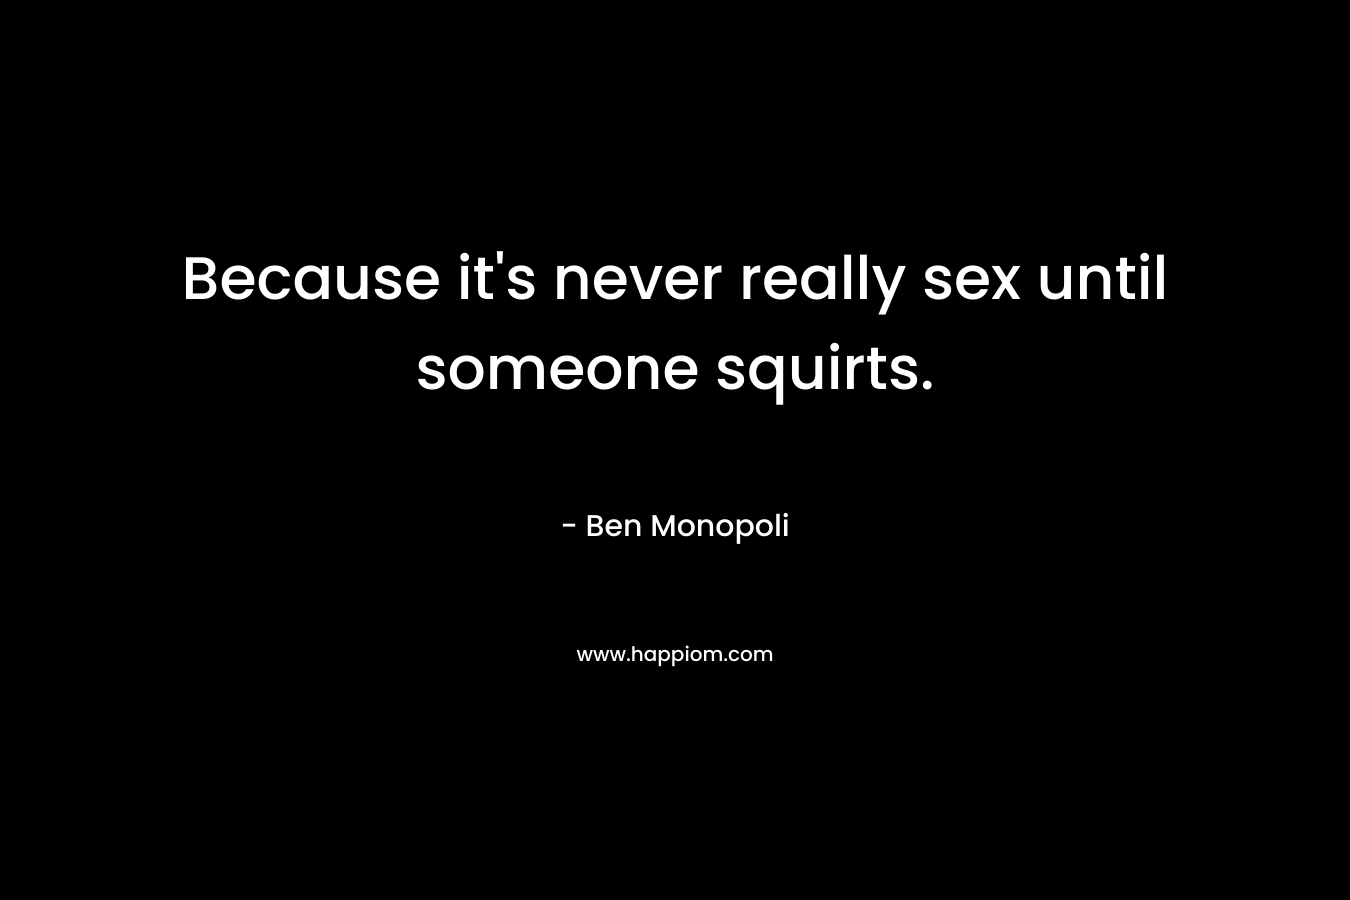 Because it's never really sex until someone squirts.